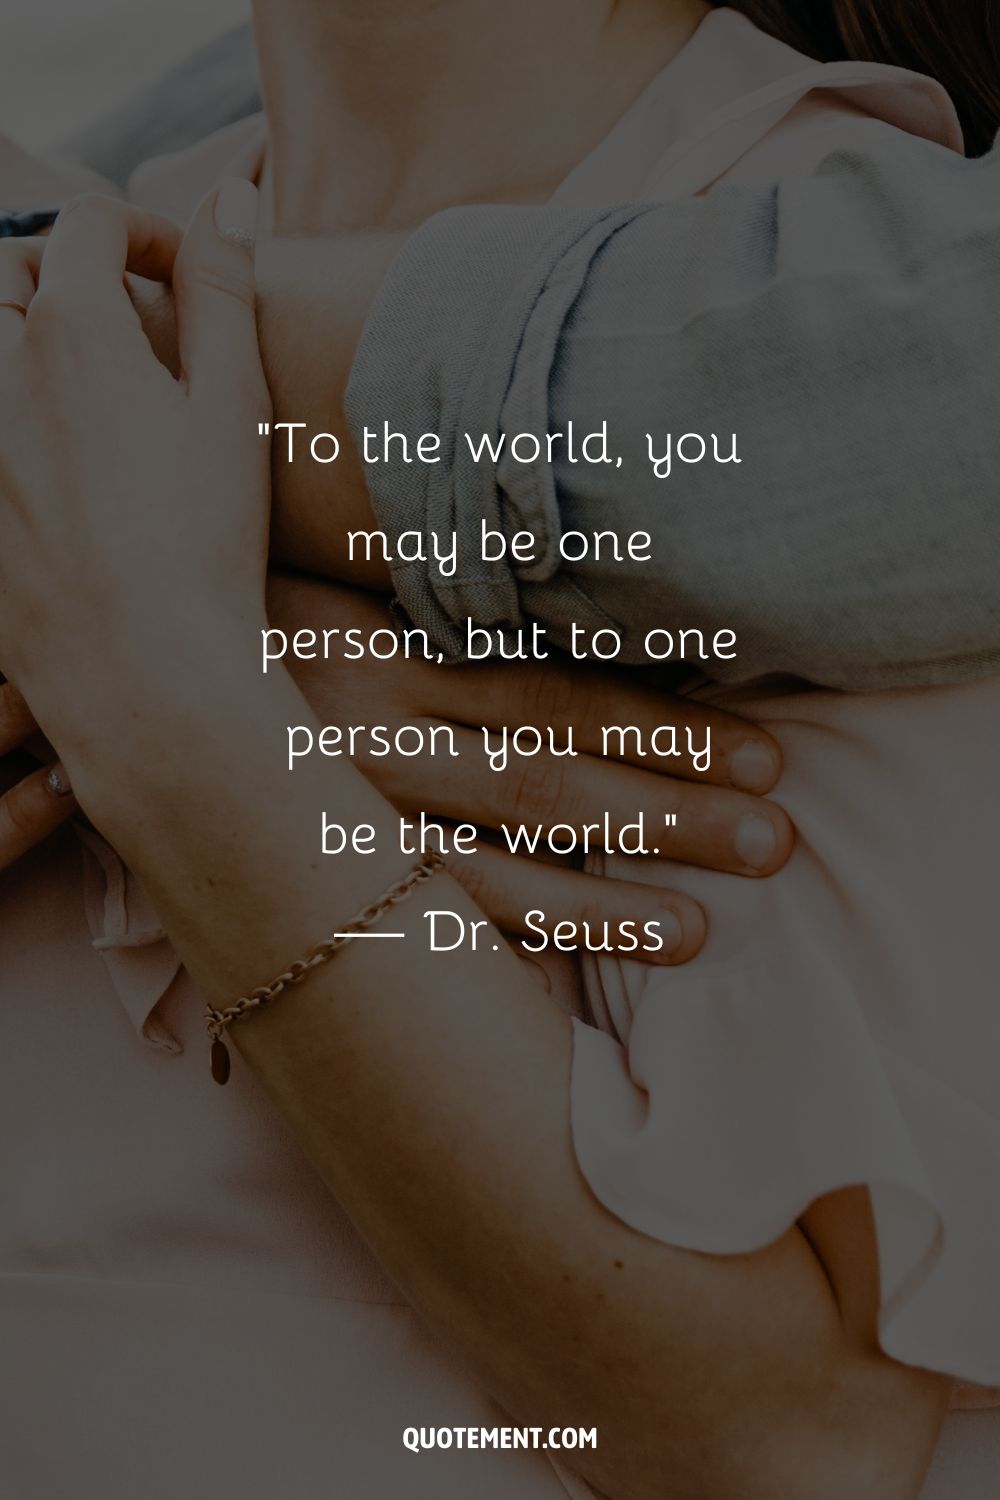 To the world, you may be one person, but to one person you may be the world.